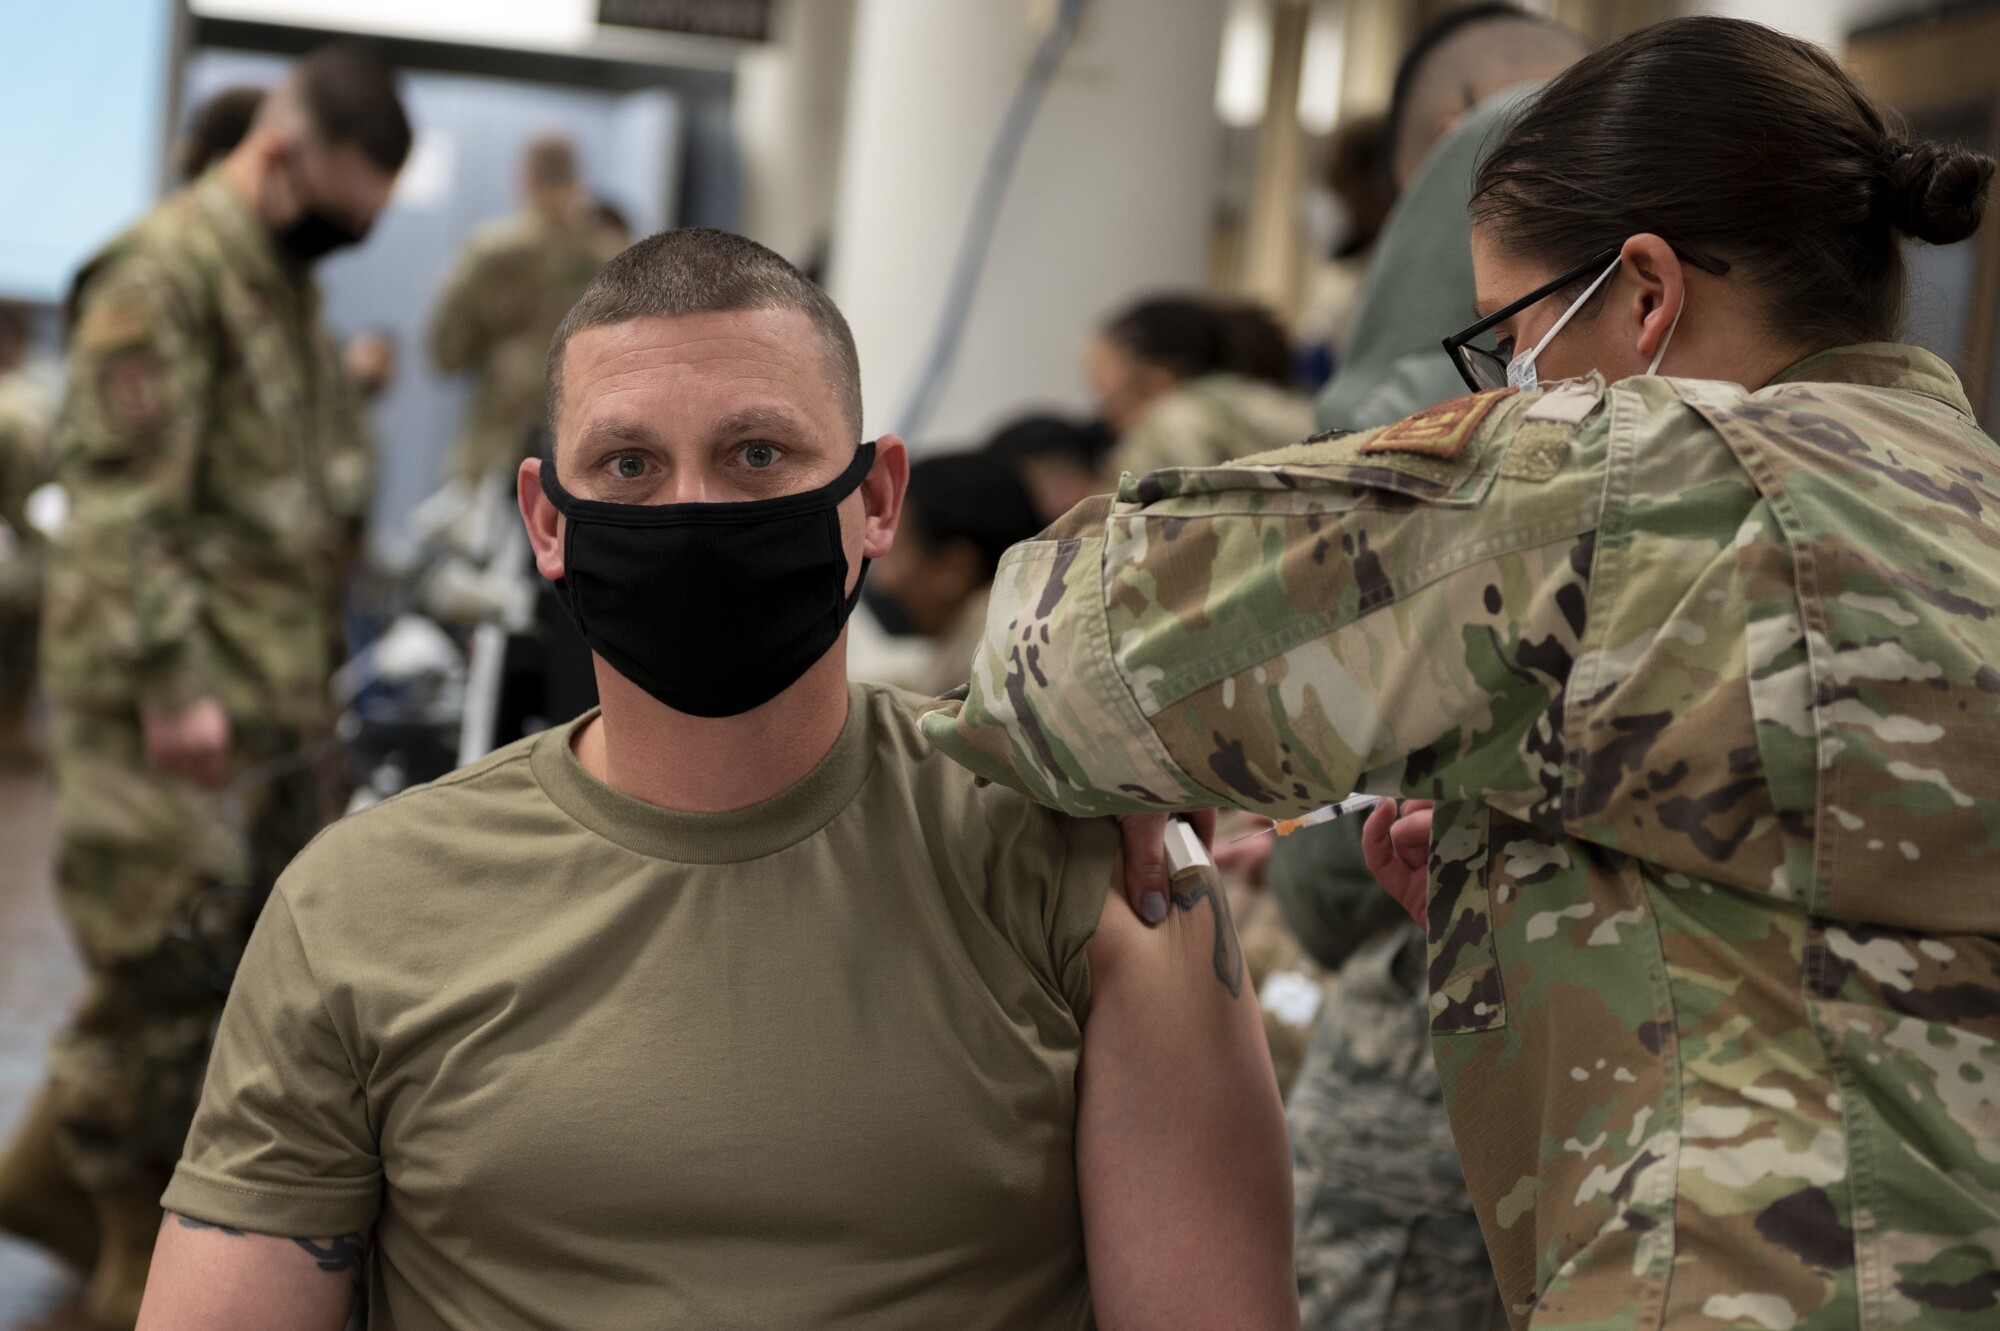 Appeals Court Rejects Air Force’s Effort to Lift COVID-19 Vaccine Mandate Injunction